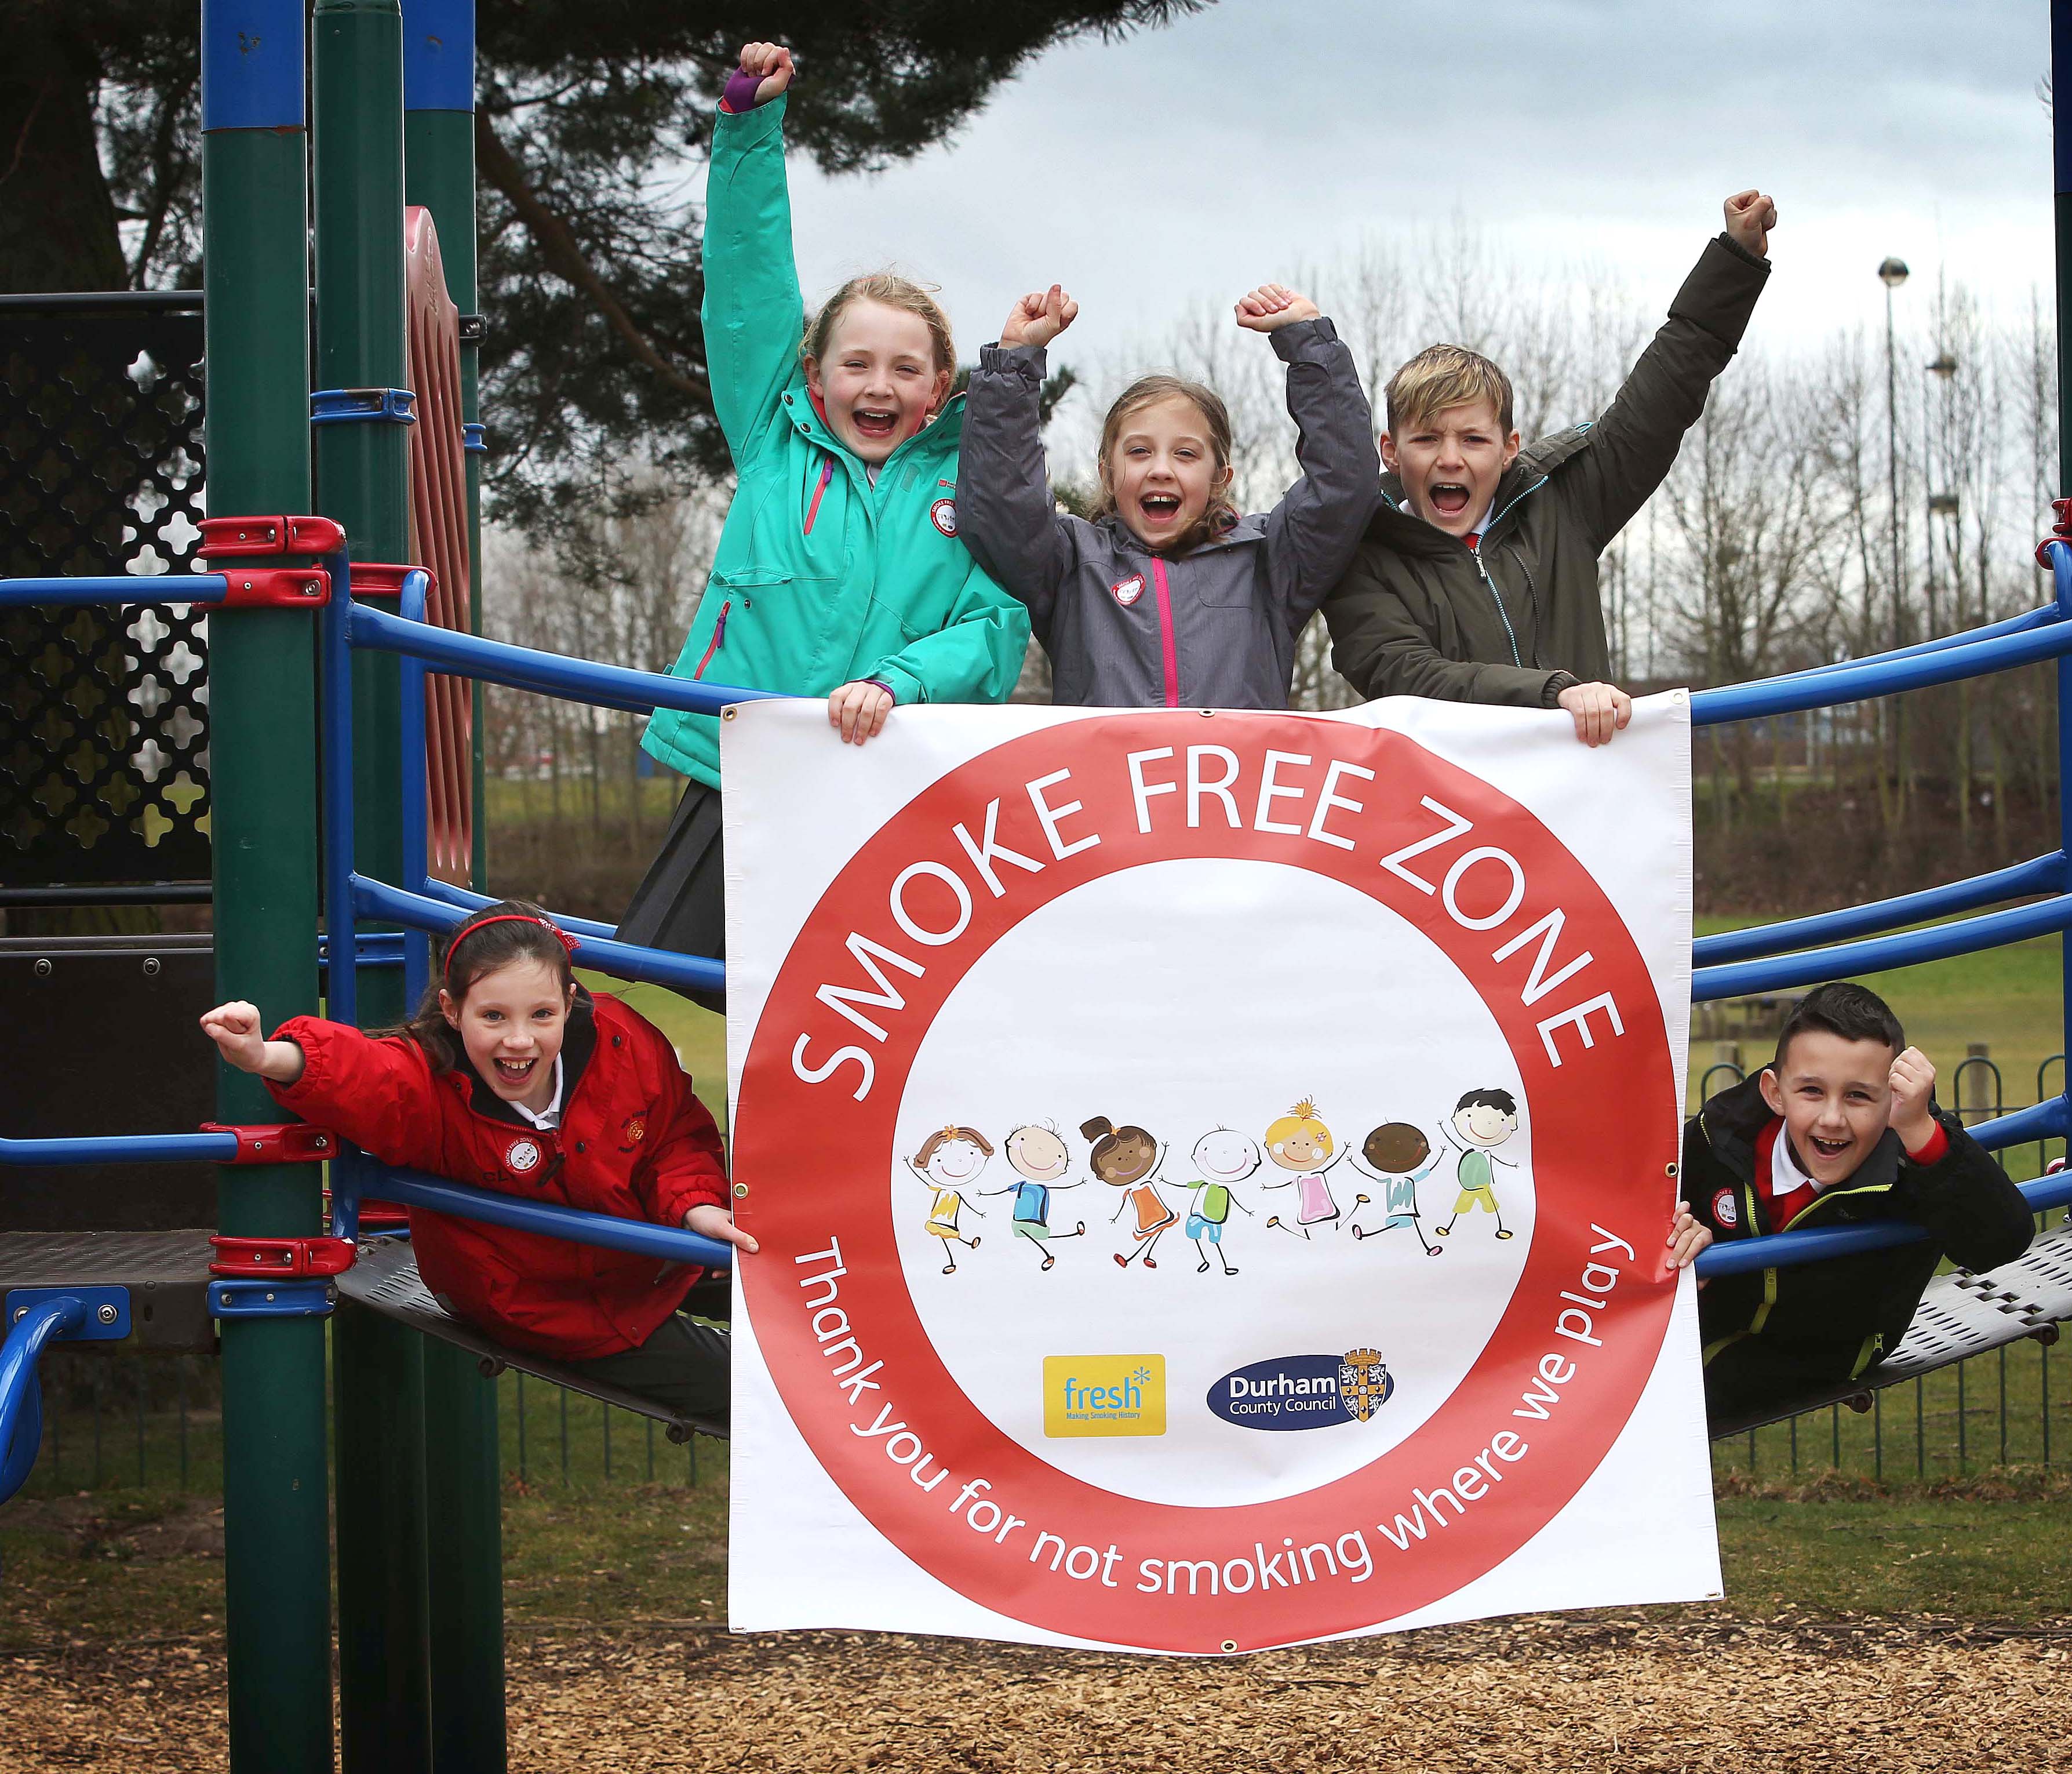 Will Aycliffe Introduce Smoke-free Play Areas?